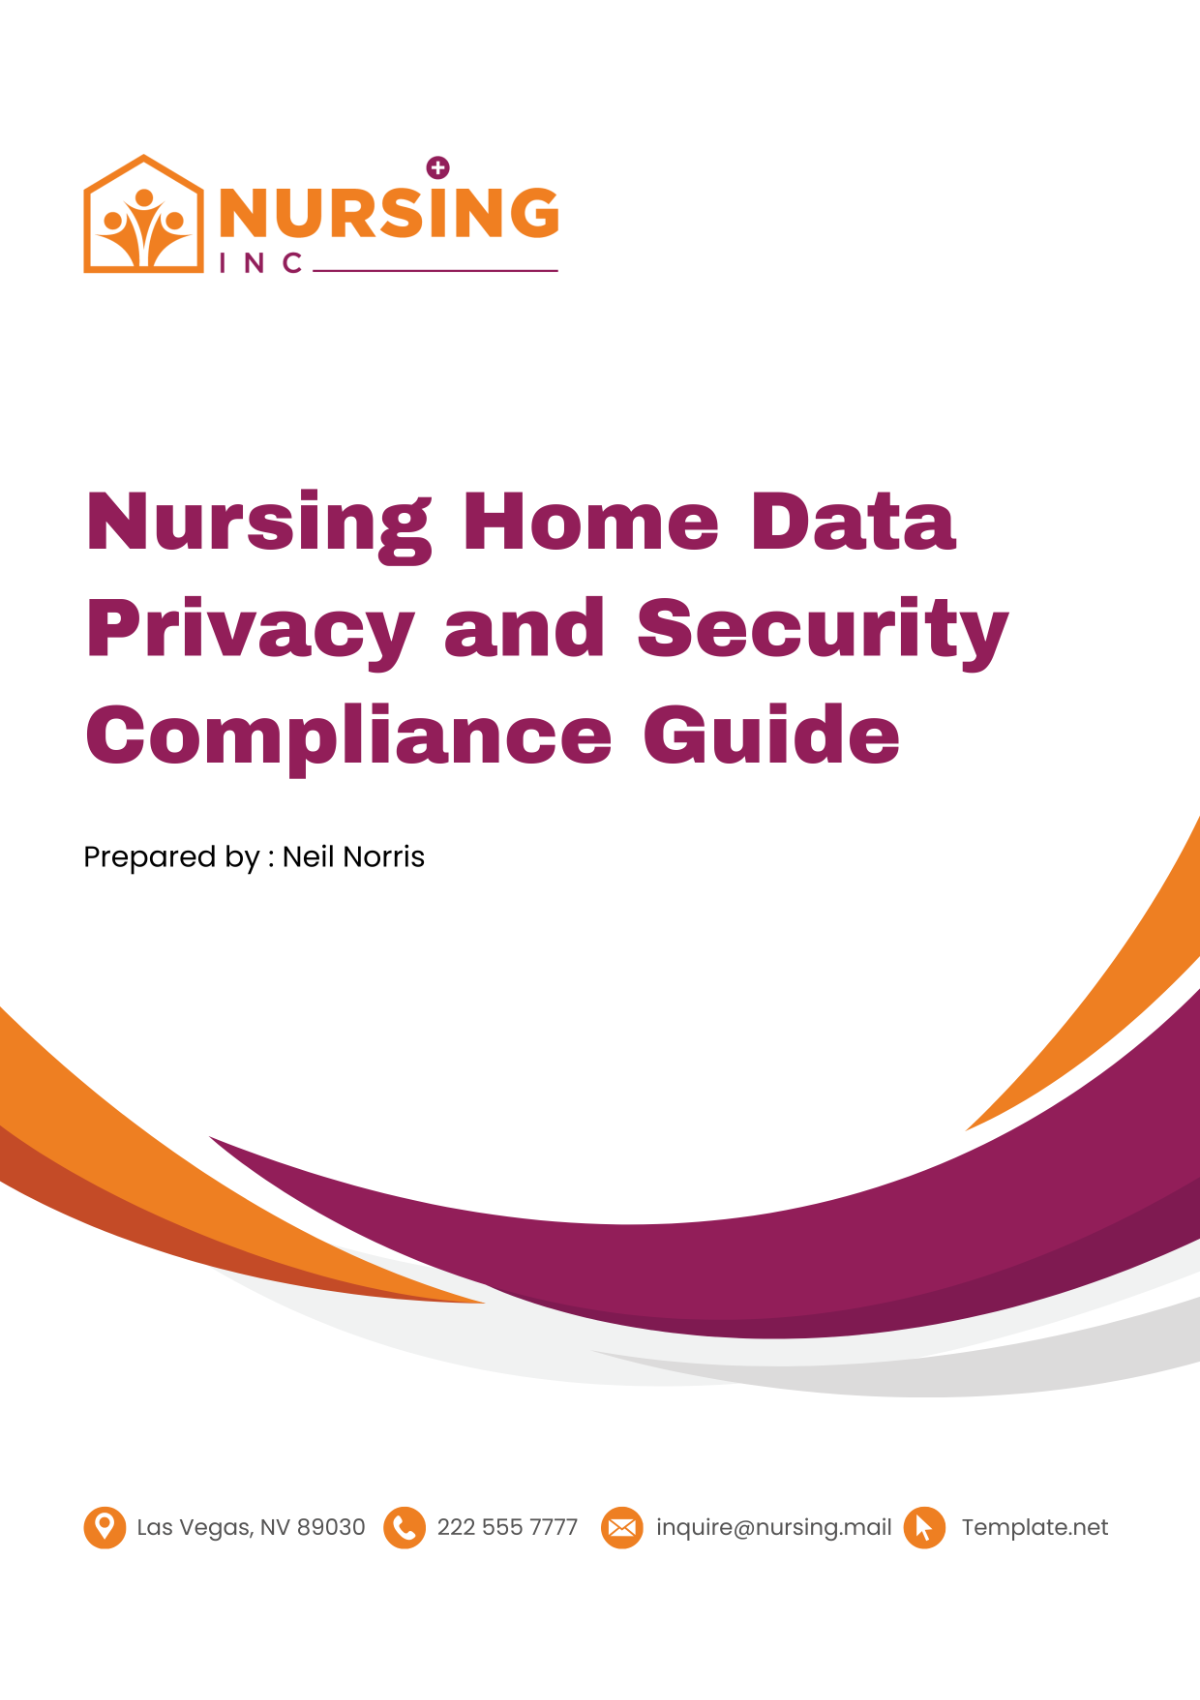 Nursing Home Data Privacy and Security Compliance Guide Template